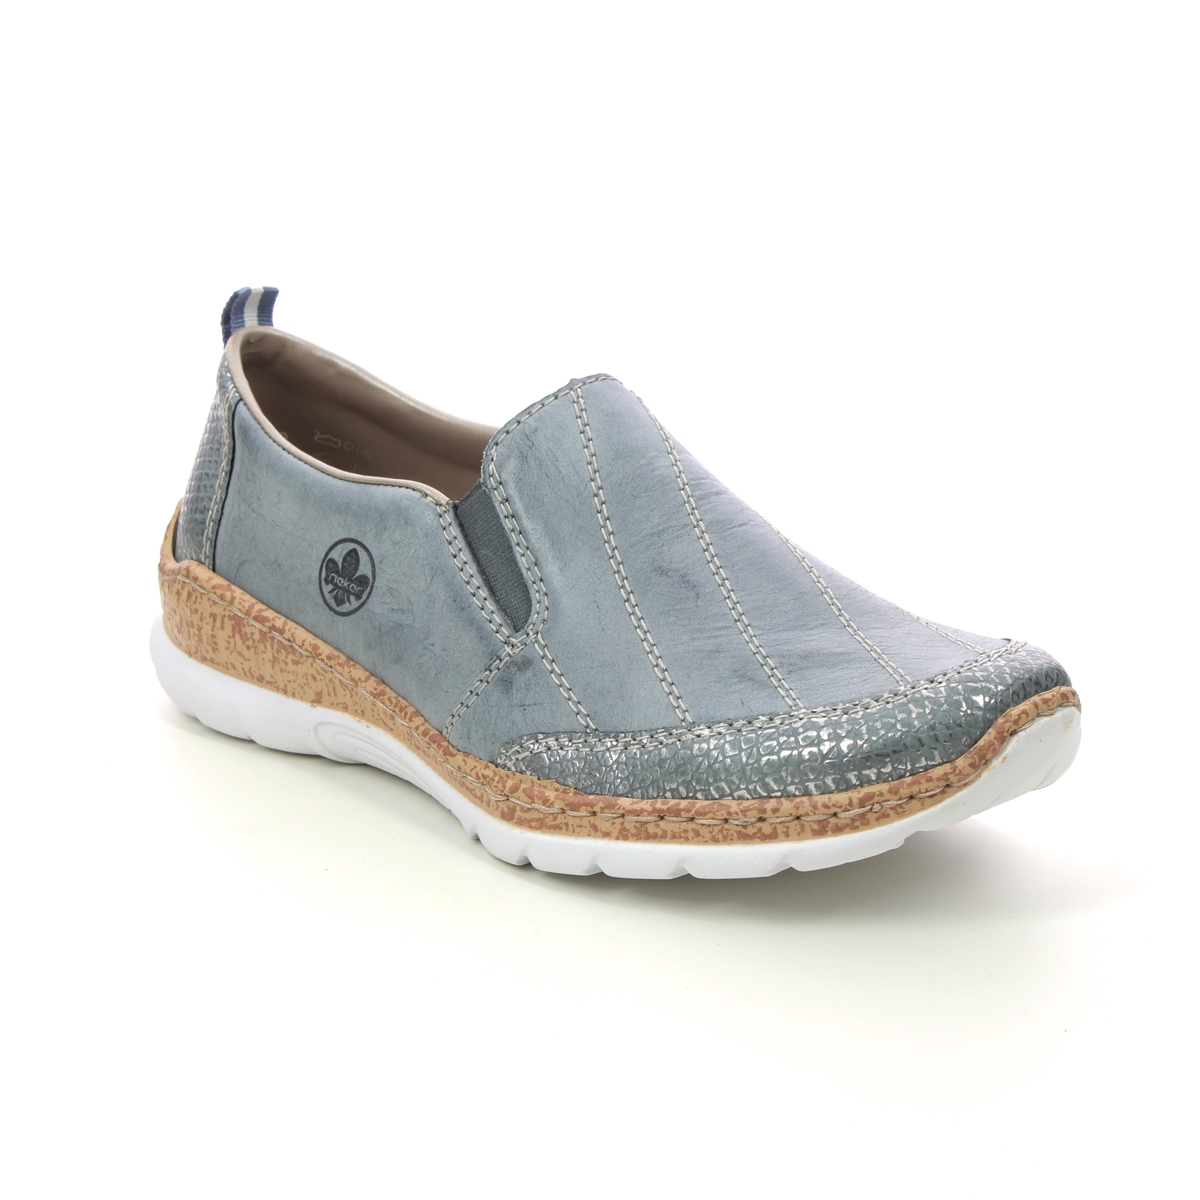 Rieker Empilucas Denim Leather Womens Comfort Slip On Shoes N4274-12 In Size 41 In Plain Denim Leather